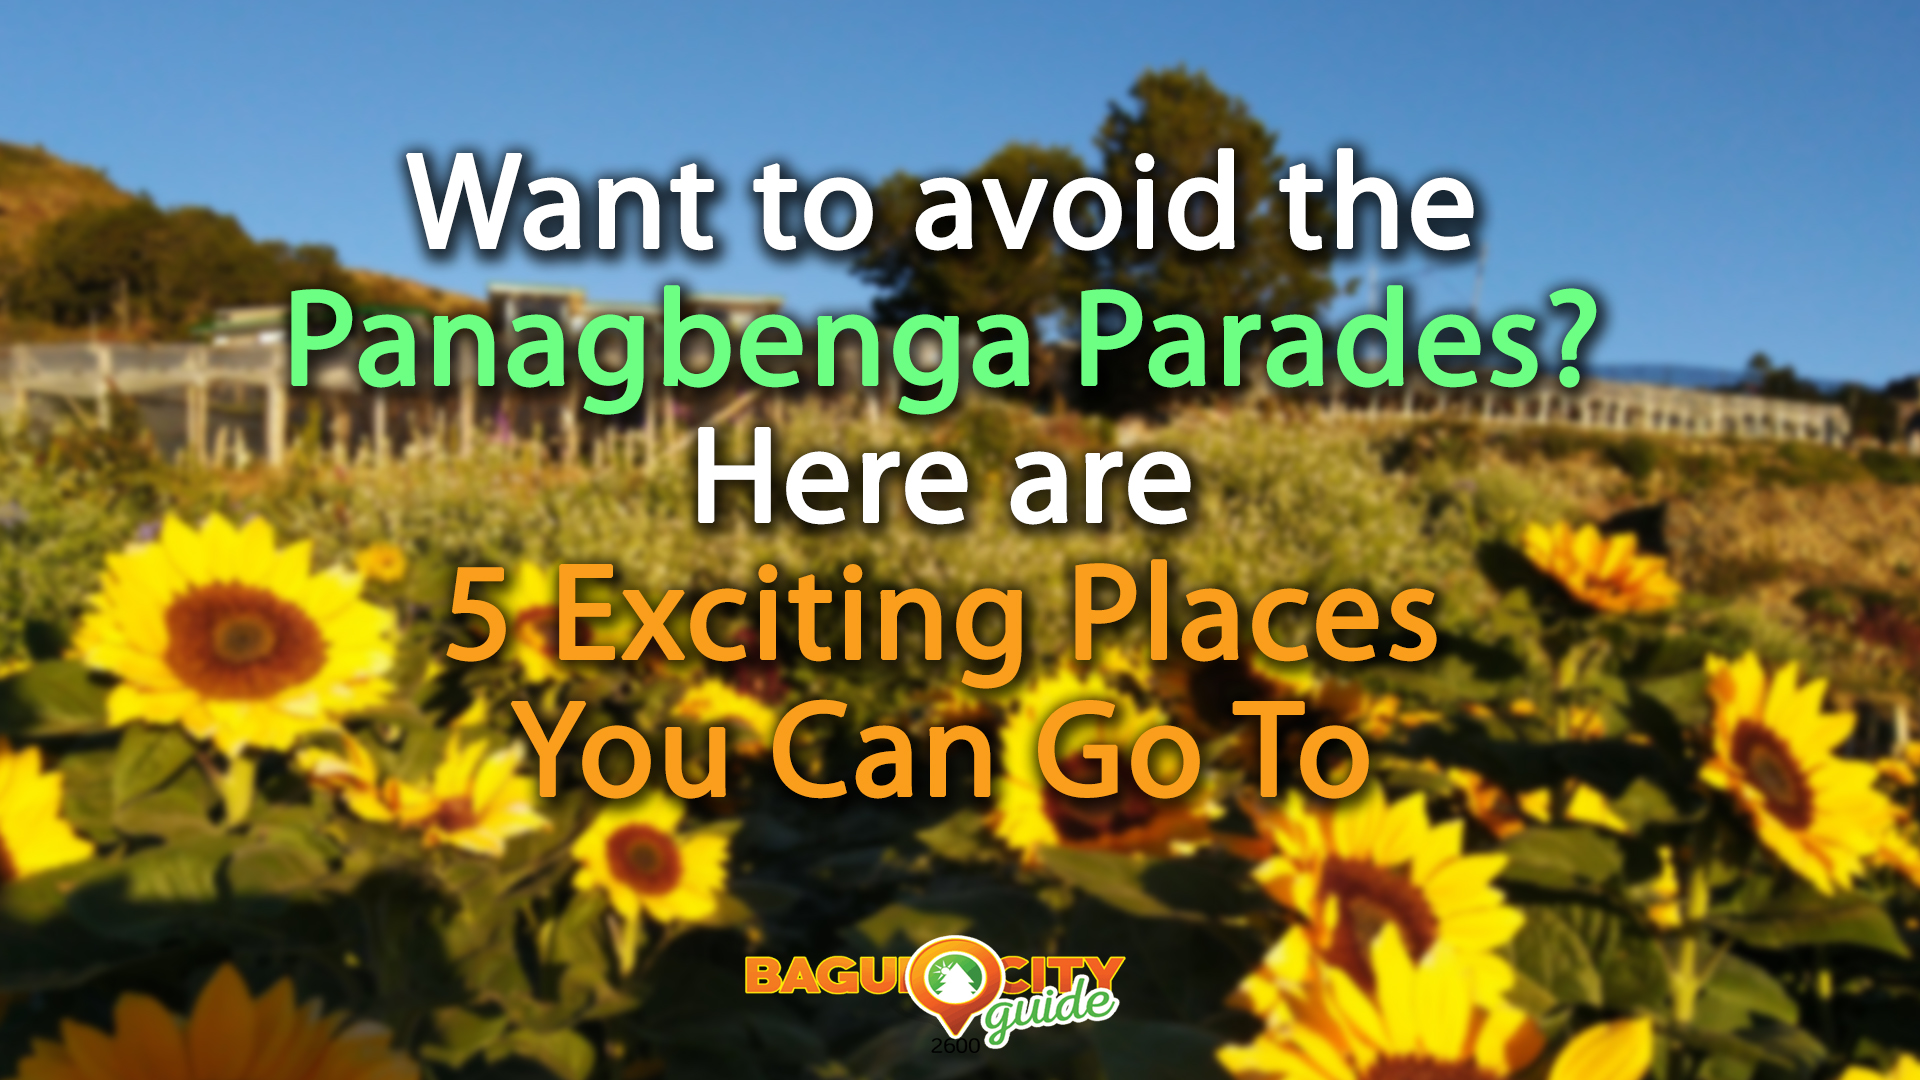 5 places you can go to - Baguio City Guide is Your Insiders Guide in Baguio City